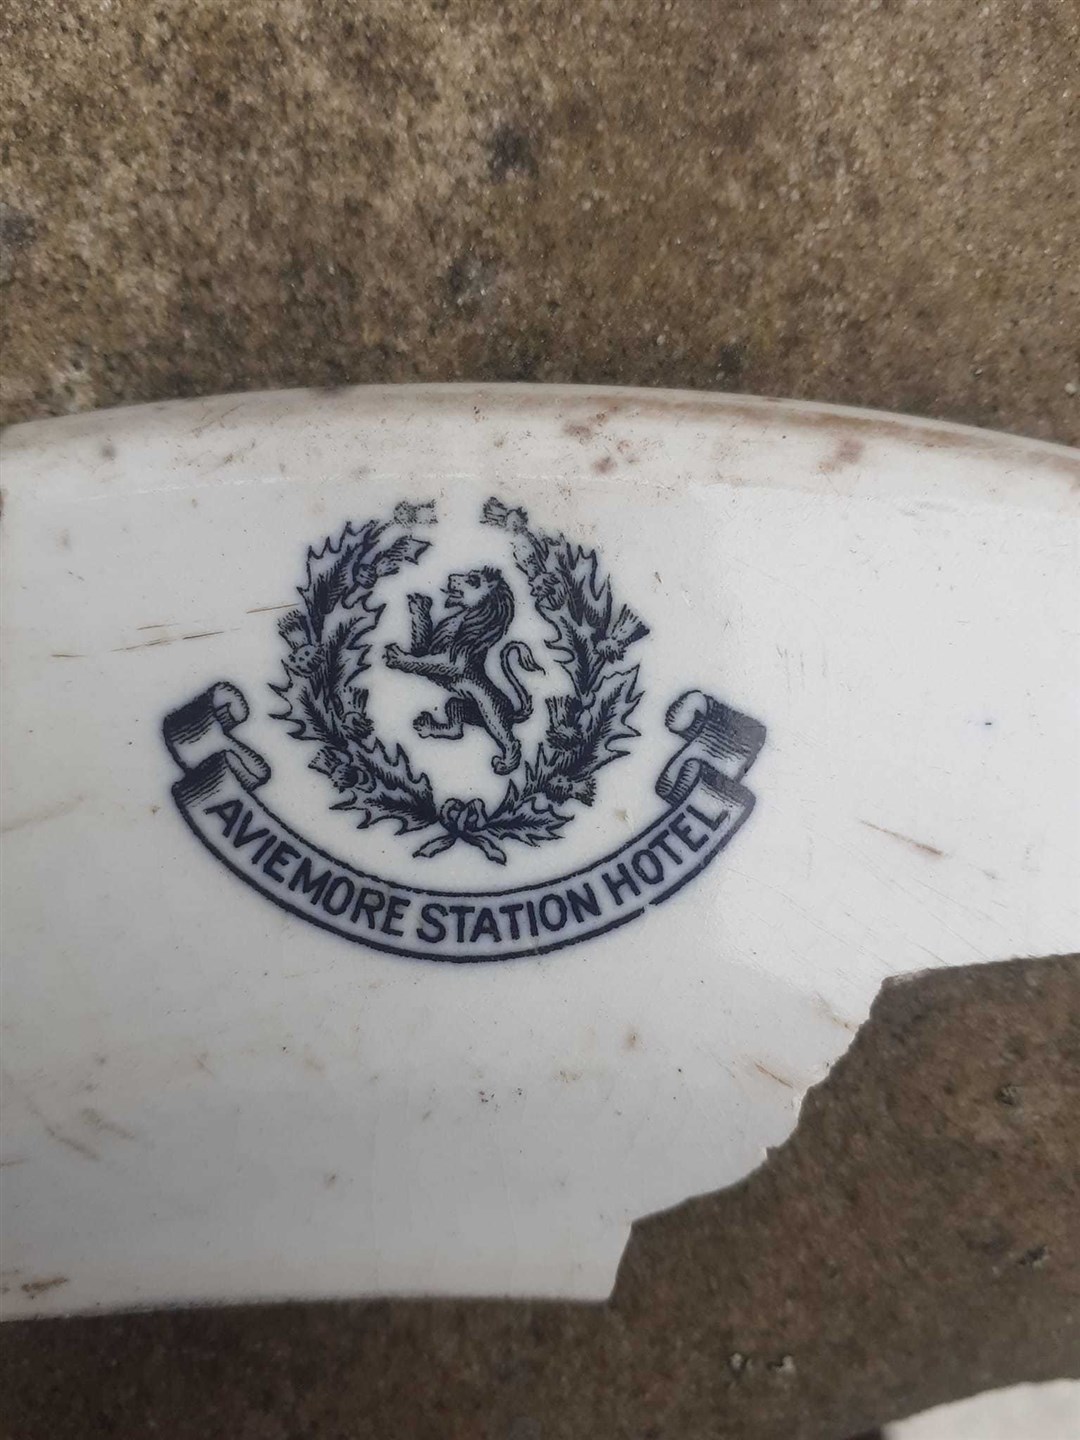 Vivid livery: the stamp still so clear on the piece of plate found in an Aviemore car park this week